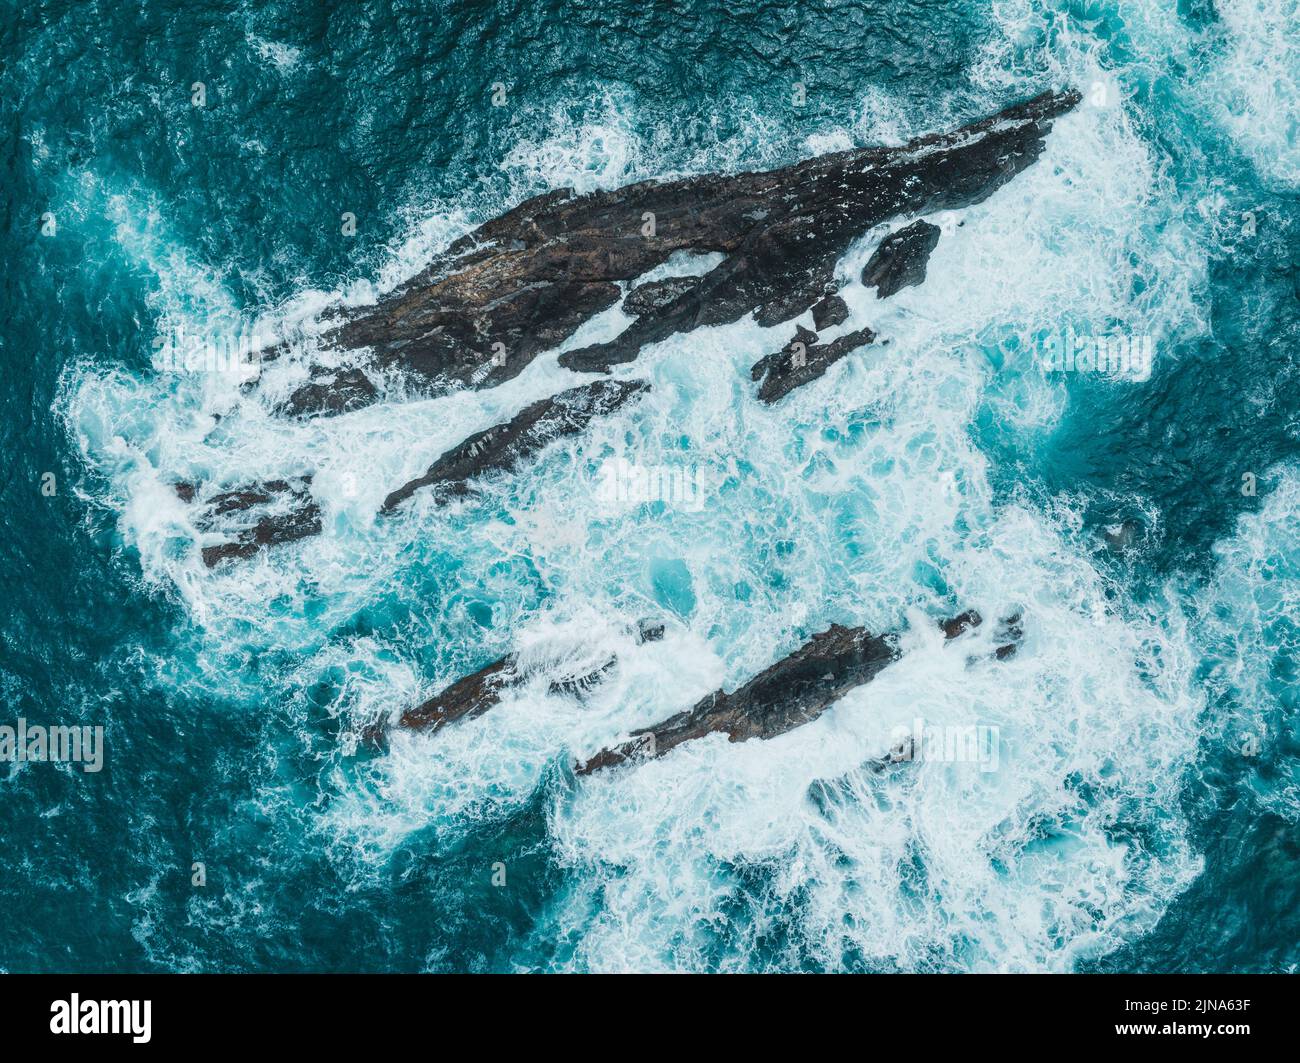 Aerial view of waves breaking on rocks, Madeira, Portugal Stock Photo